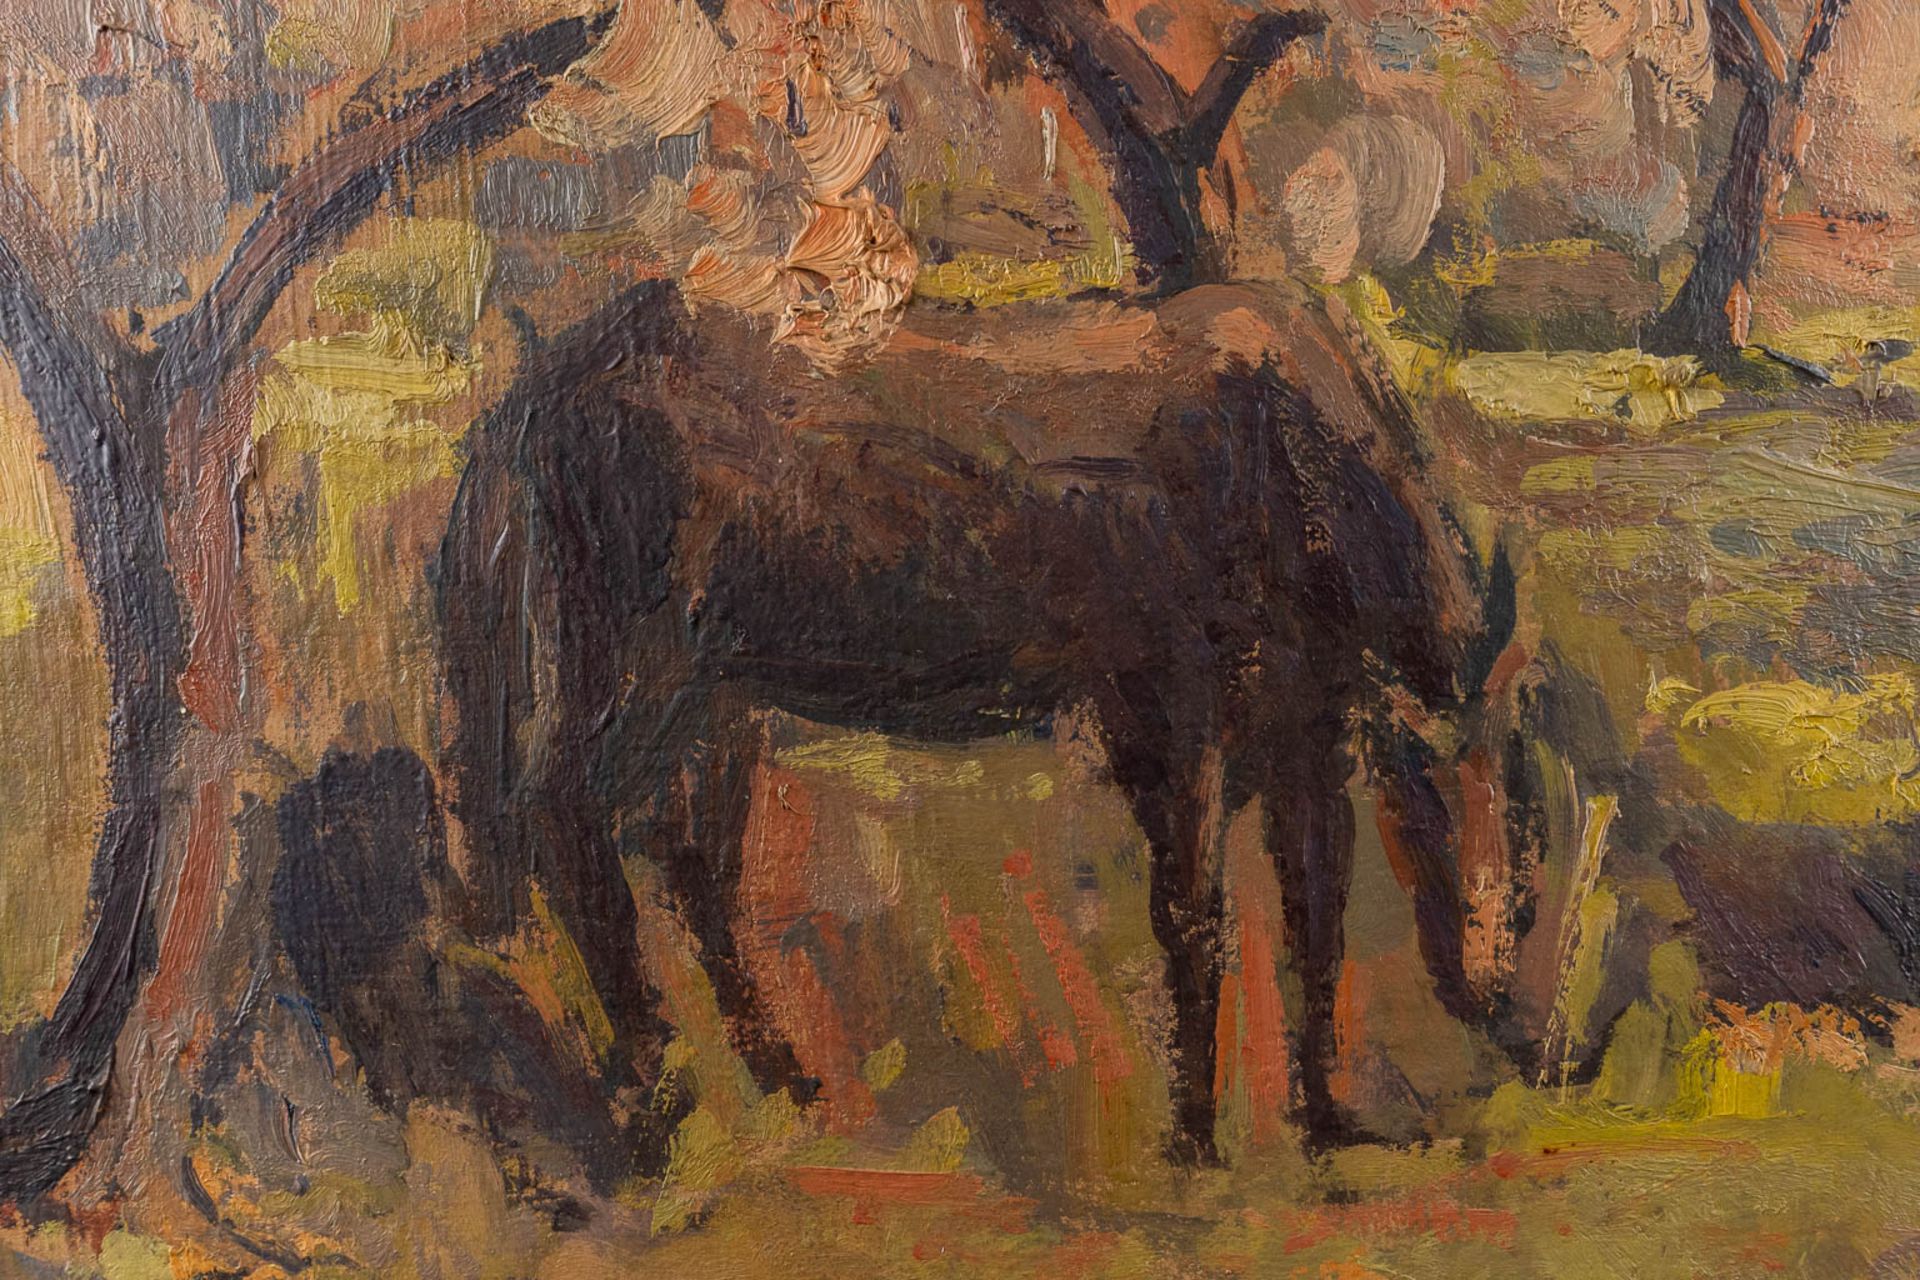 Frits GILTAY (1907-1970) 'Waiting Horse' oil on canvas. (W:70 x H:60 cm) - Image 3 of 6